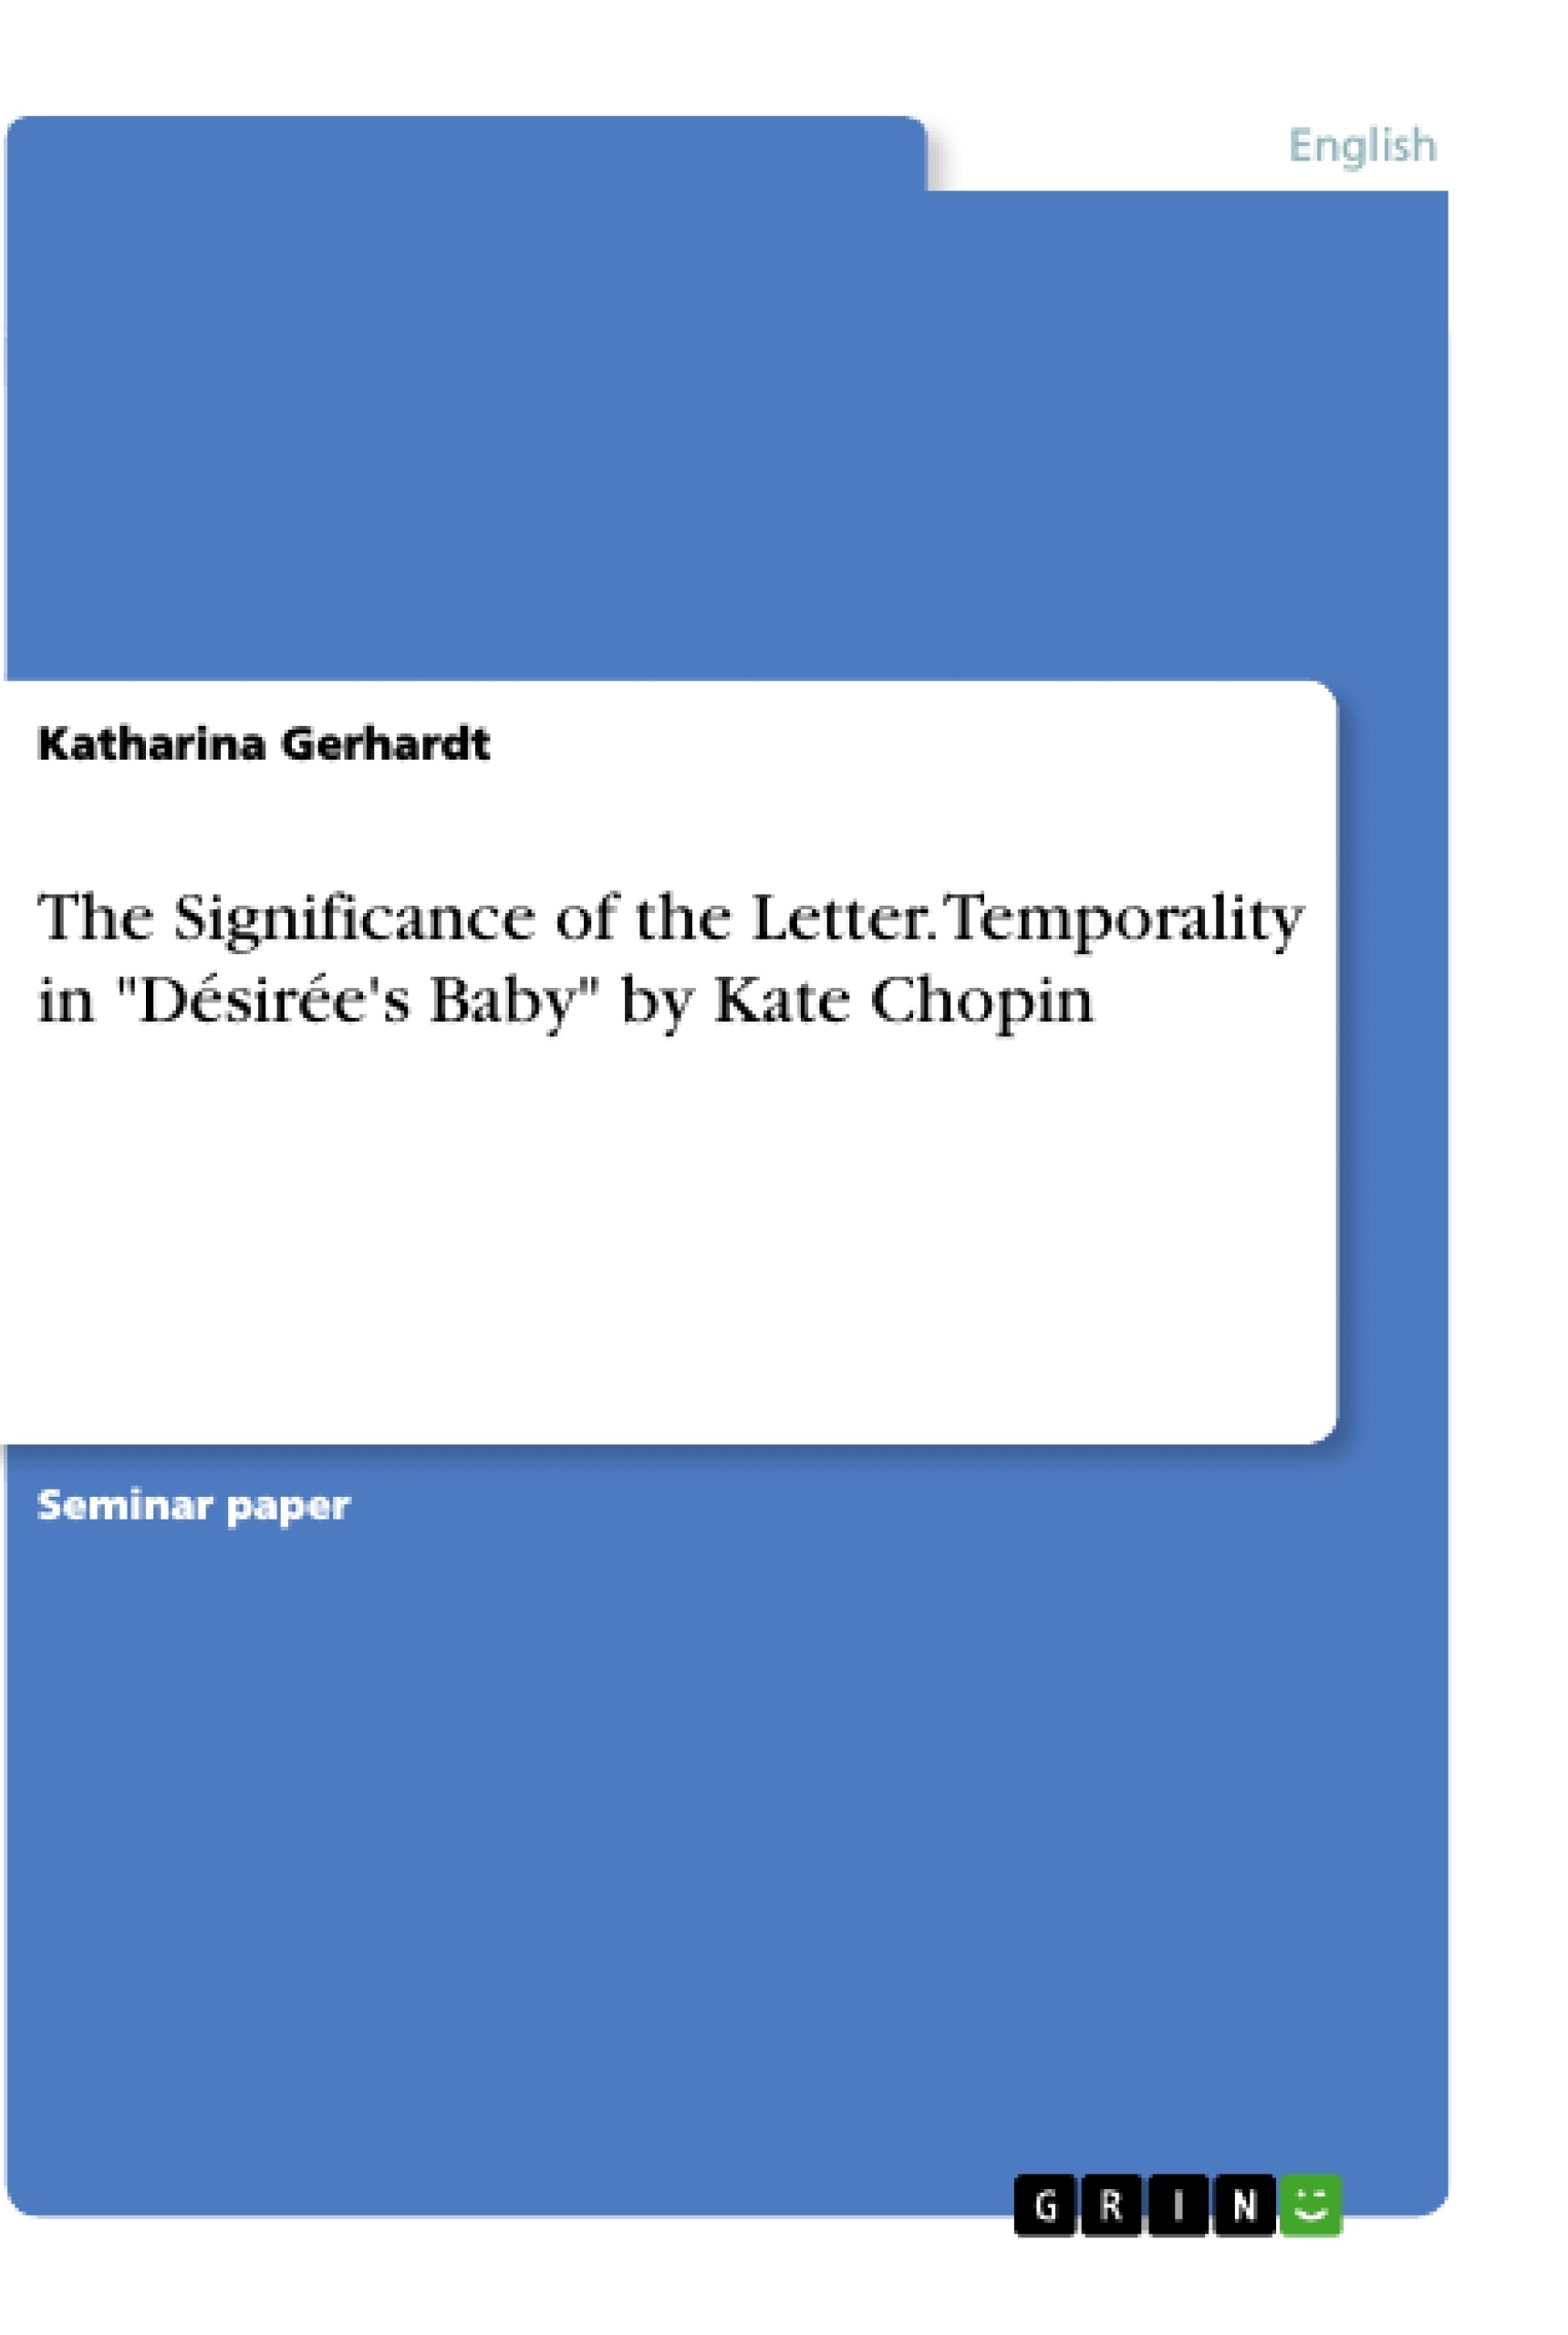 Título: The Significance of the Letter. Temporality in "Désirée's Baby" by Kate Chopin